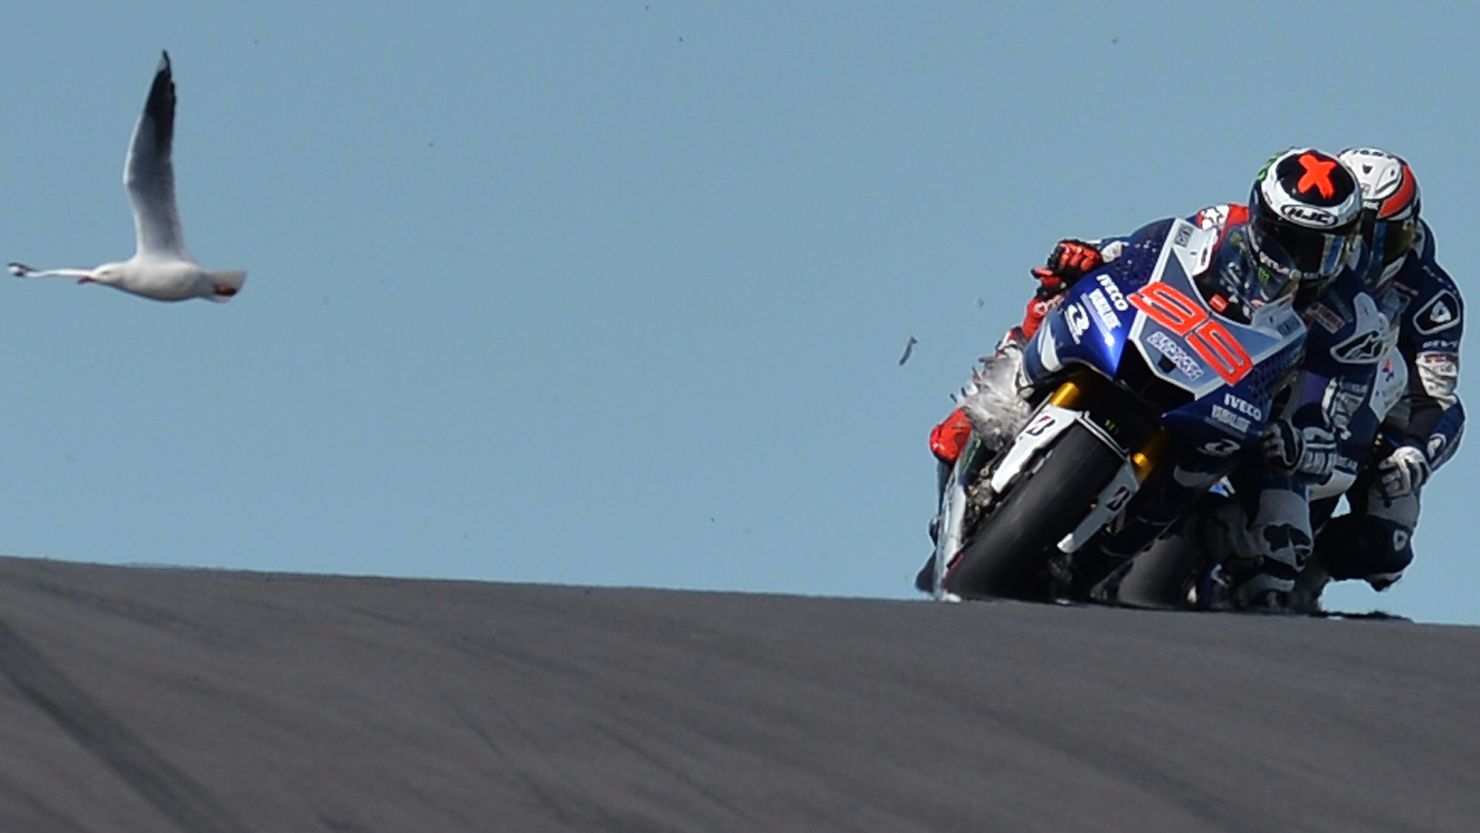 A seagull gets trapped in the forks of Jorge Lorenzo's Yamaha, while another flies in the background at the top of Lukey Heights.